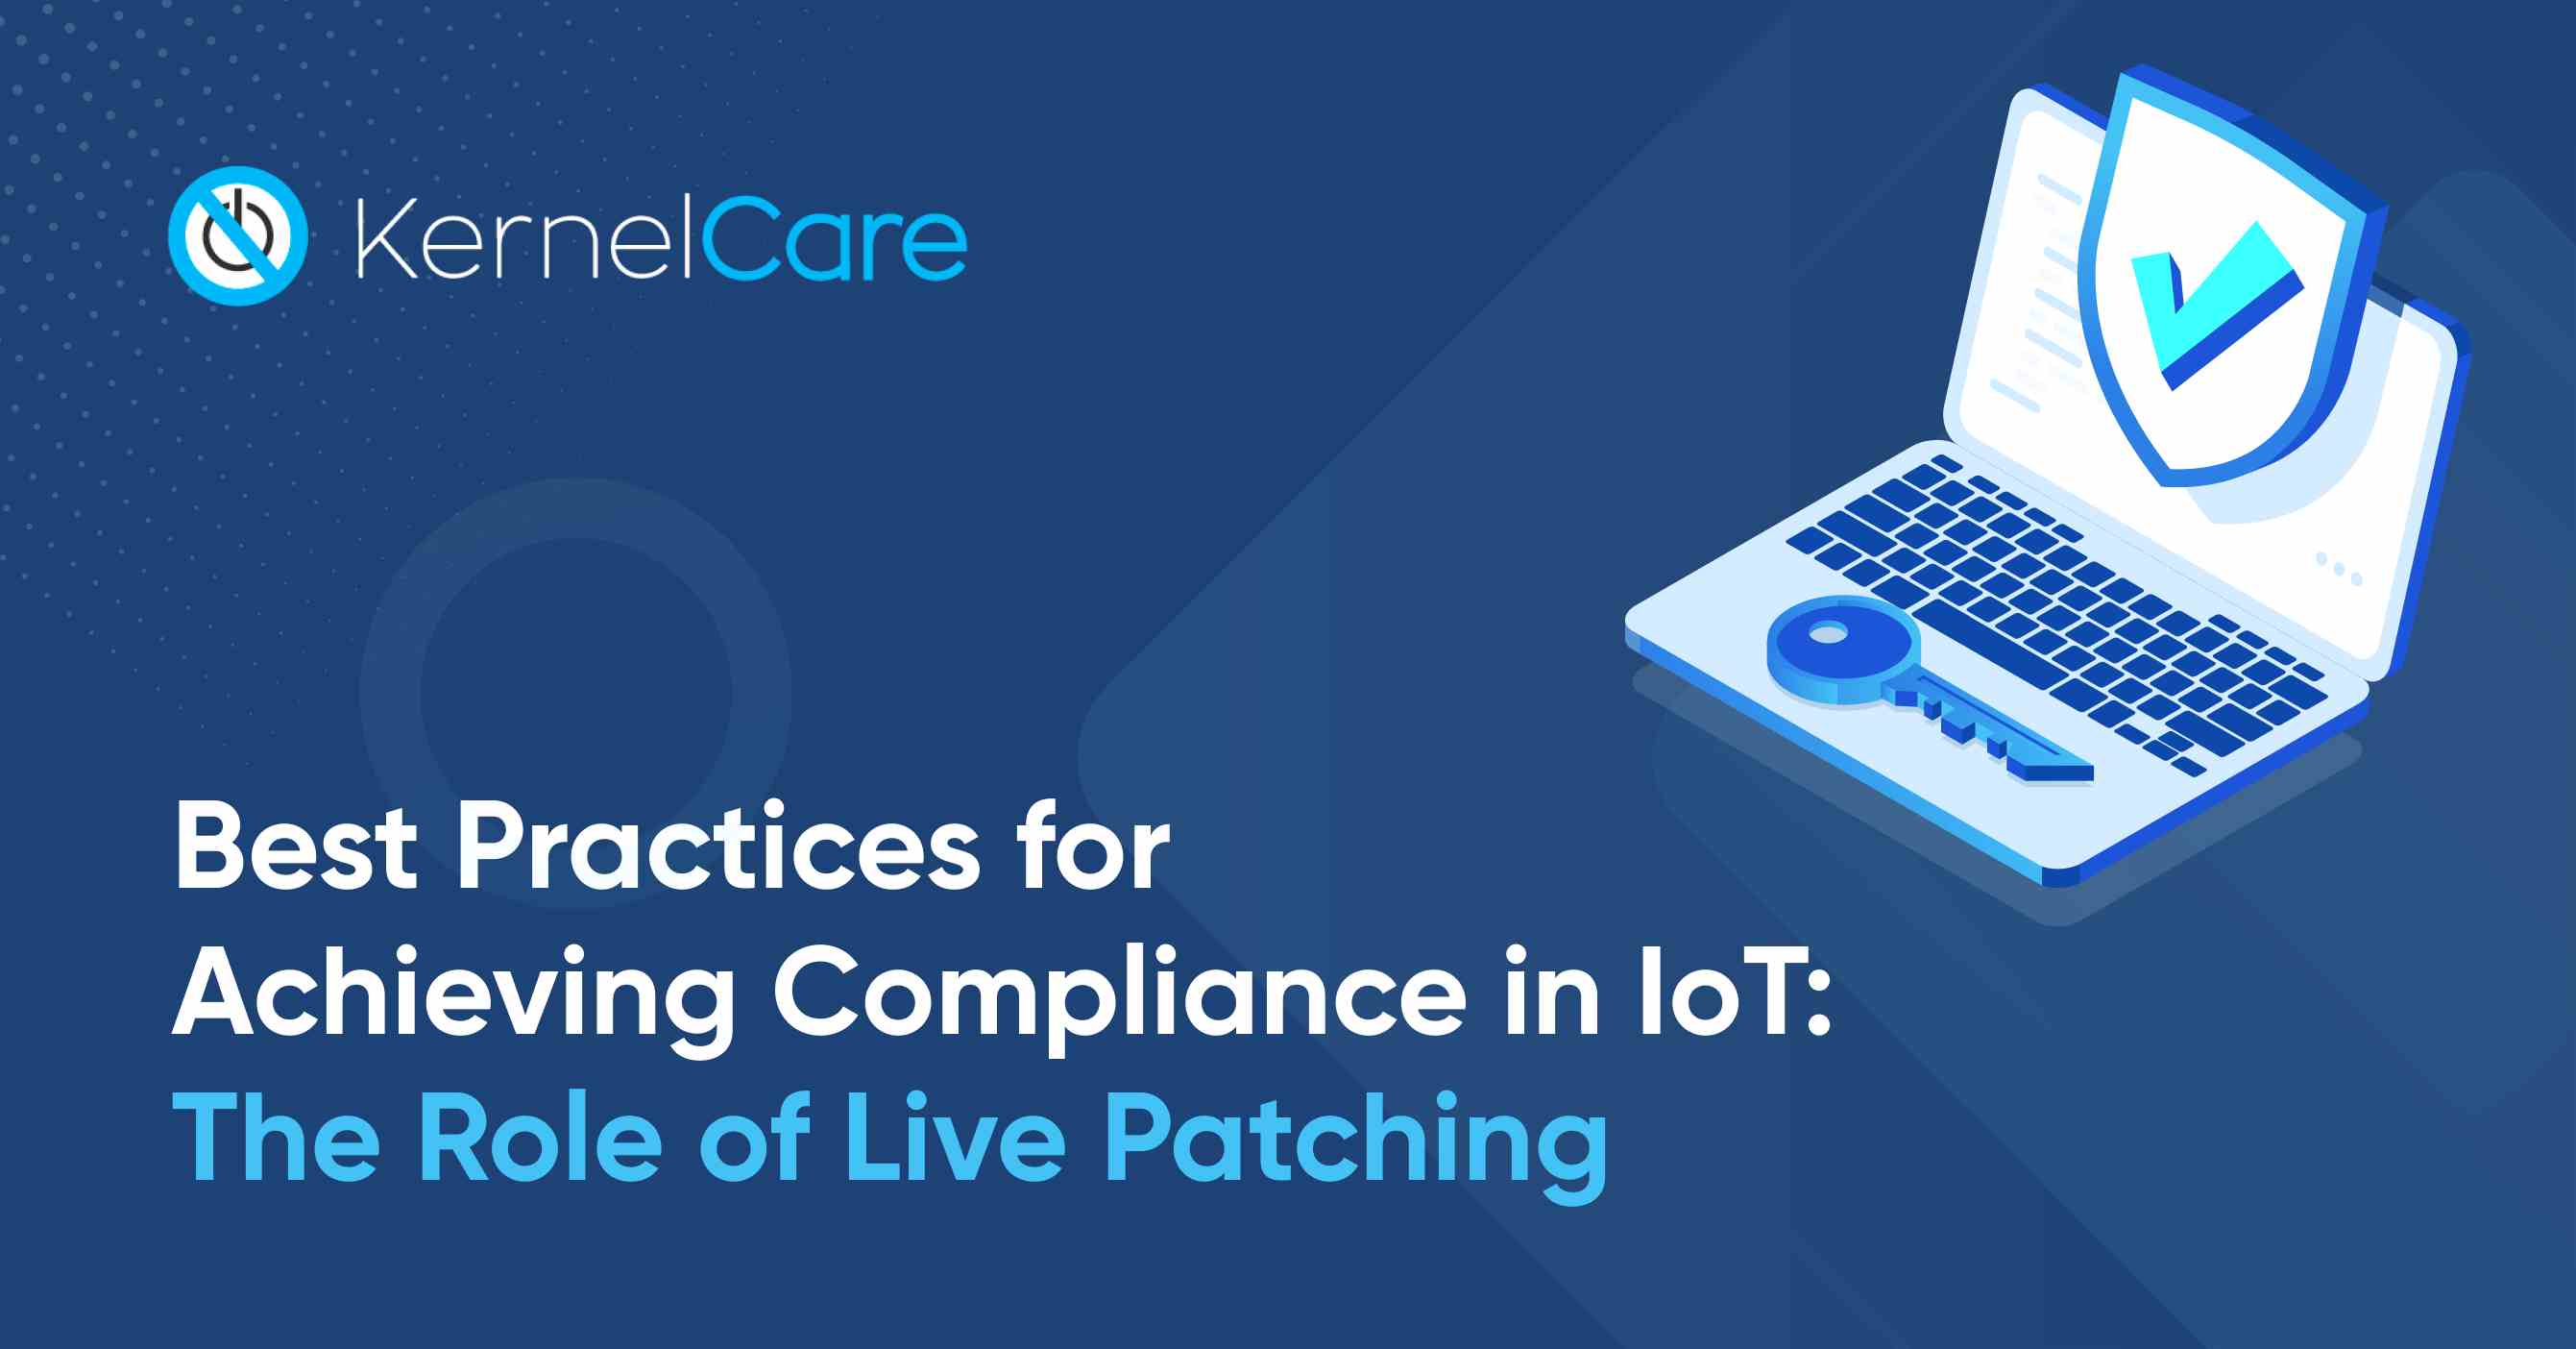 Best Practices for Achieving Compliance in IoT: The Role of Live Patching